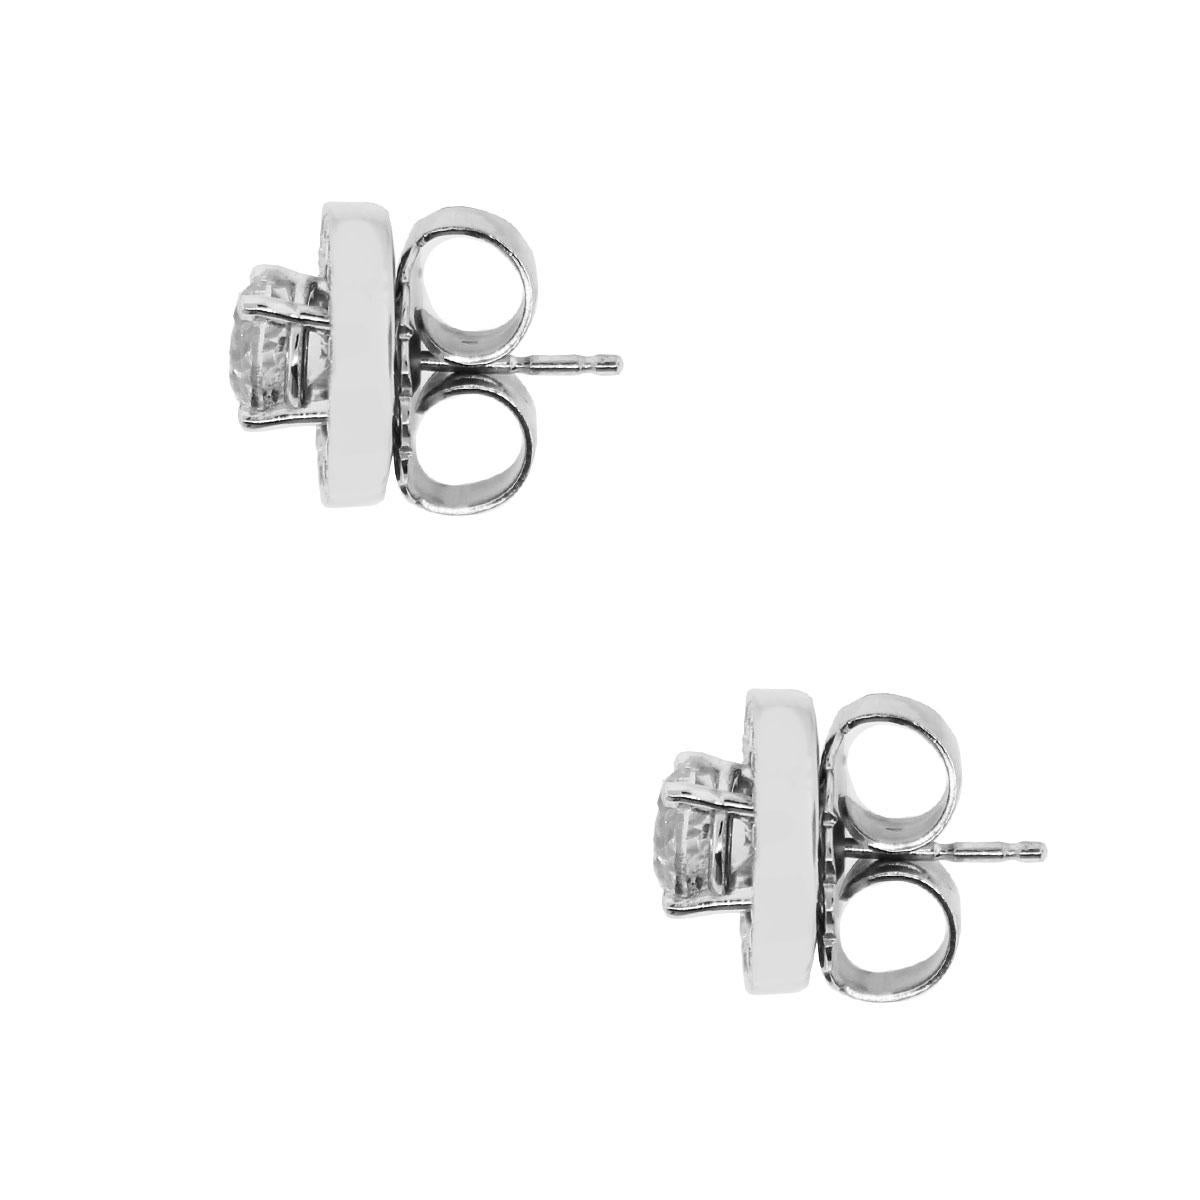 Material: 14k White Gold
Diamond Details: Approximately .50ctw diamond jackets and 1ctw studs. Diamonds are J in color and SI1 in clarity.
Clasps: Post Friction backs
Total Weight: 3.8g (2.4dwt)
Measurements: 0.52